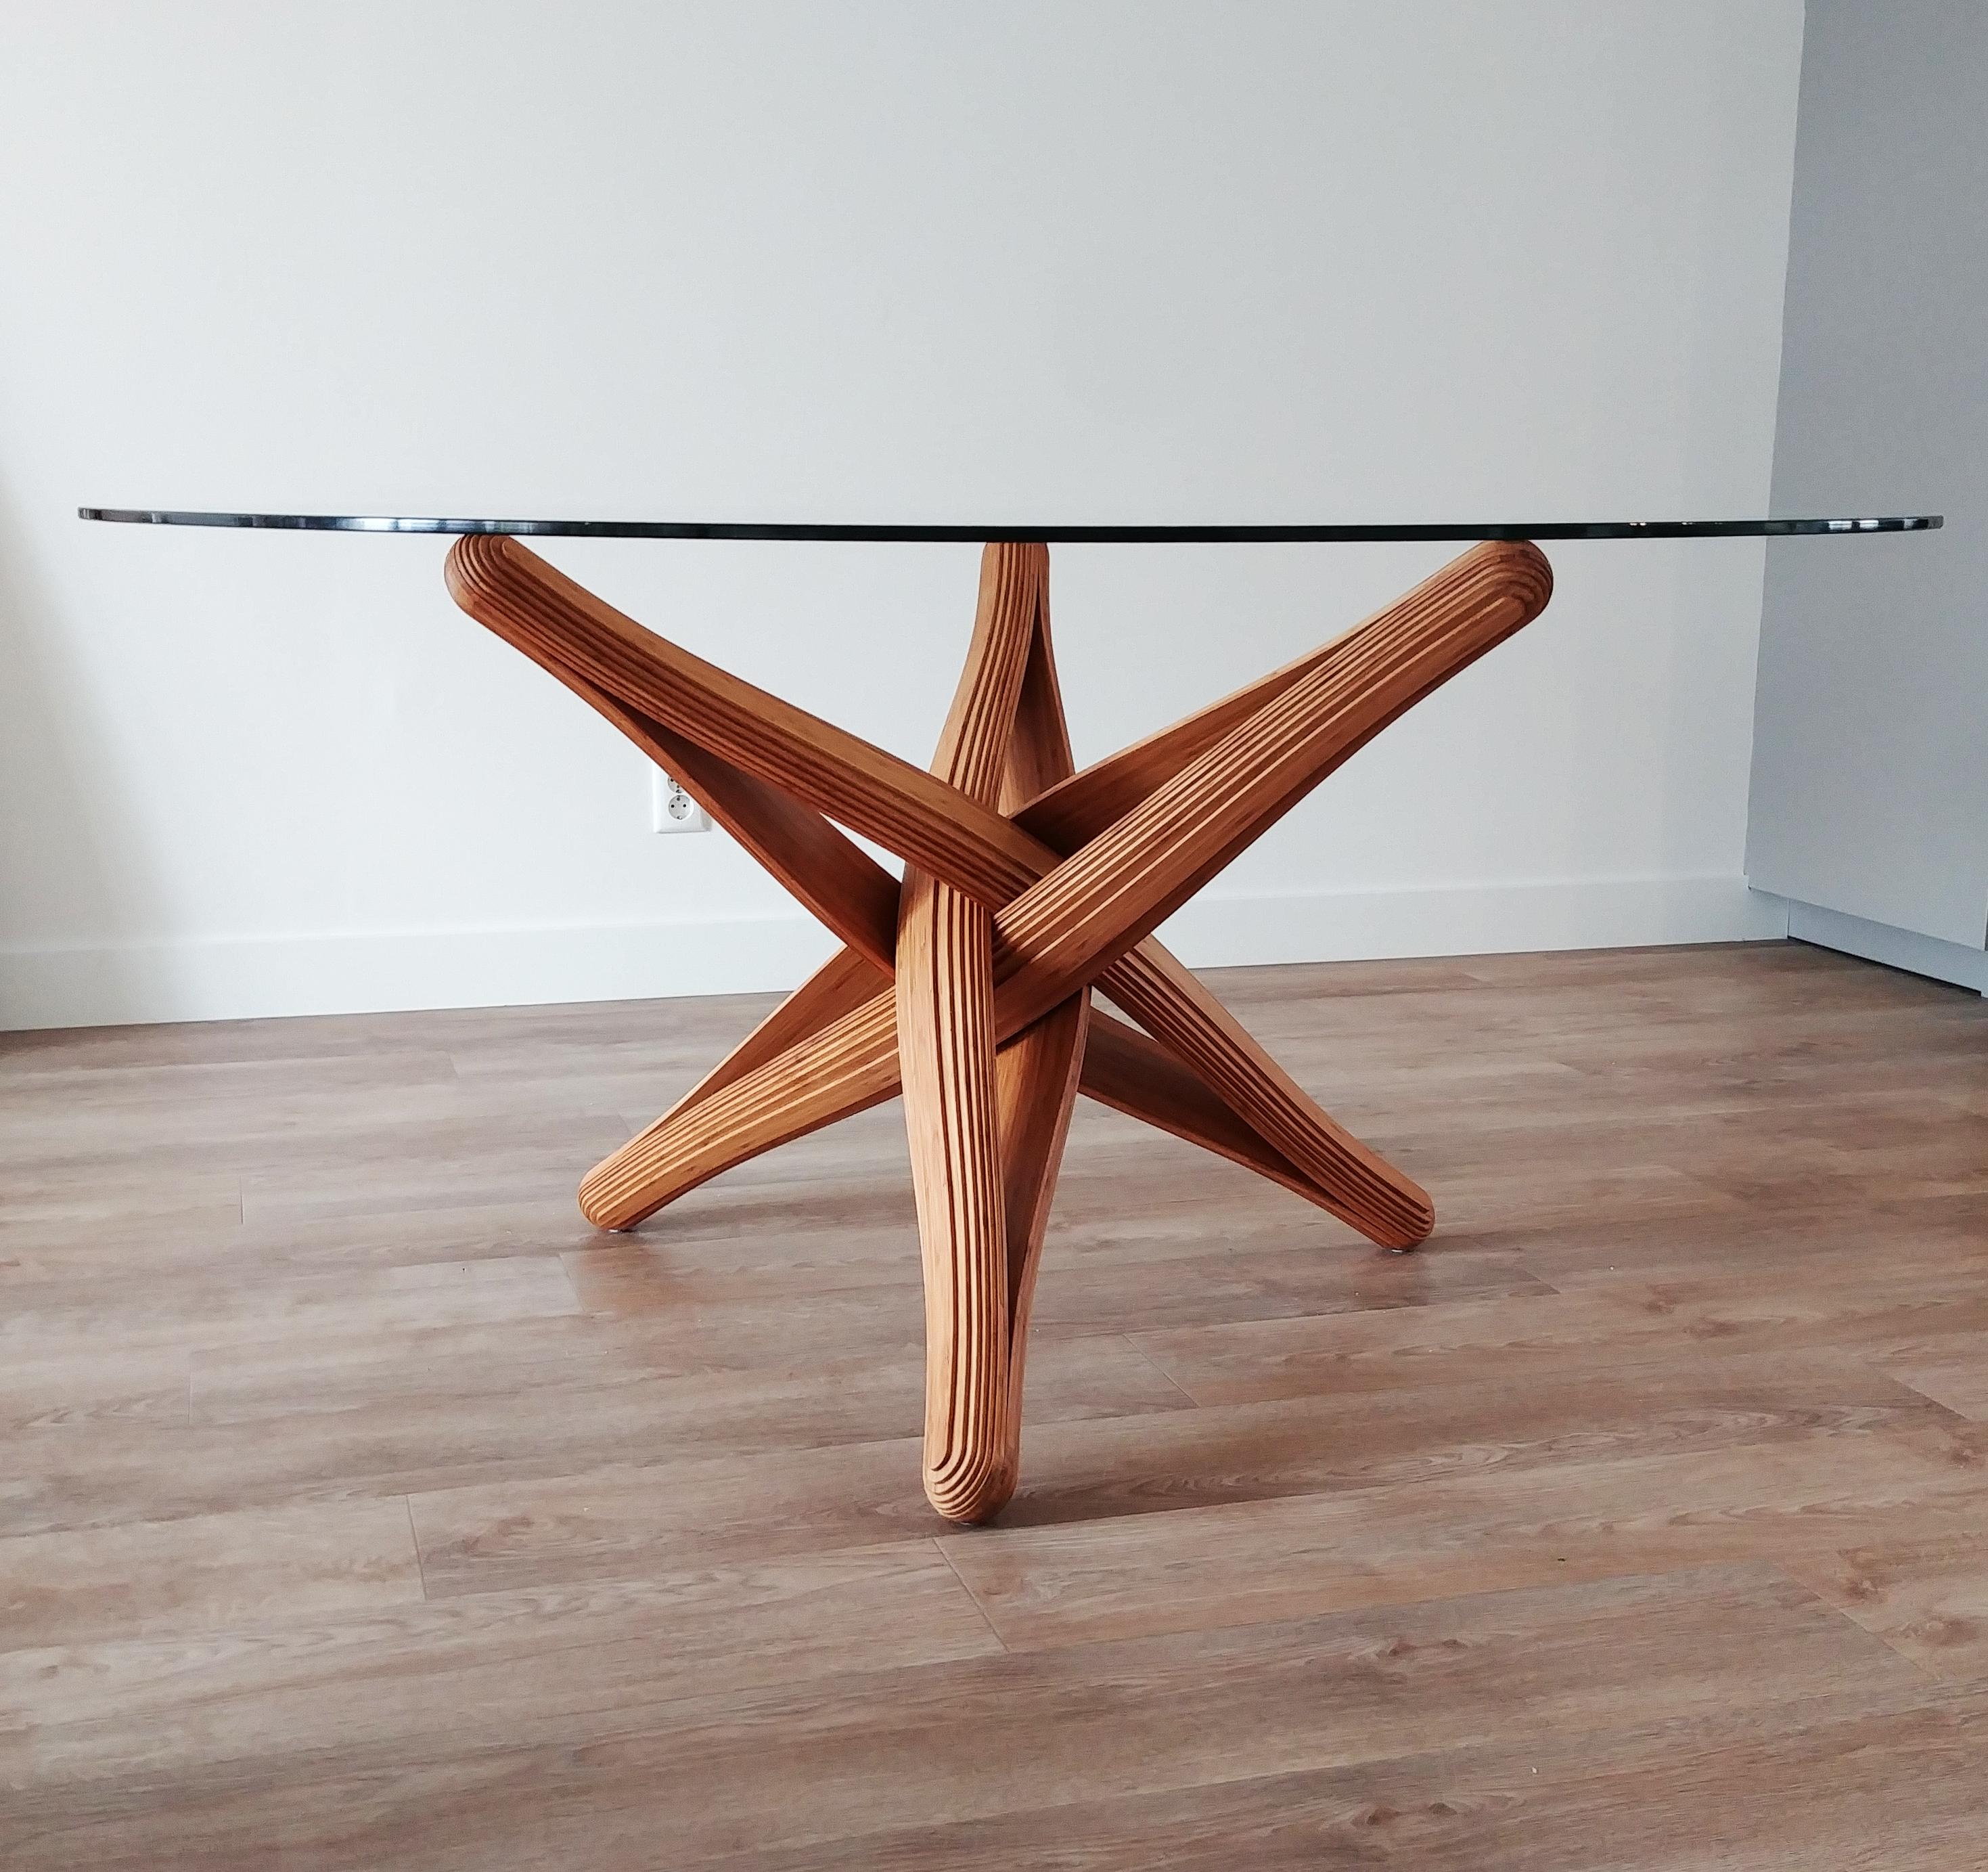 “LOCK” dining table is designed out of the qualities, possibilities and characteristics of its material: bamboo. The frame is build up from pressed layers of flexible bamboo. The shape is formed by the bamboo’s natural bending curve. The layers of